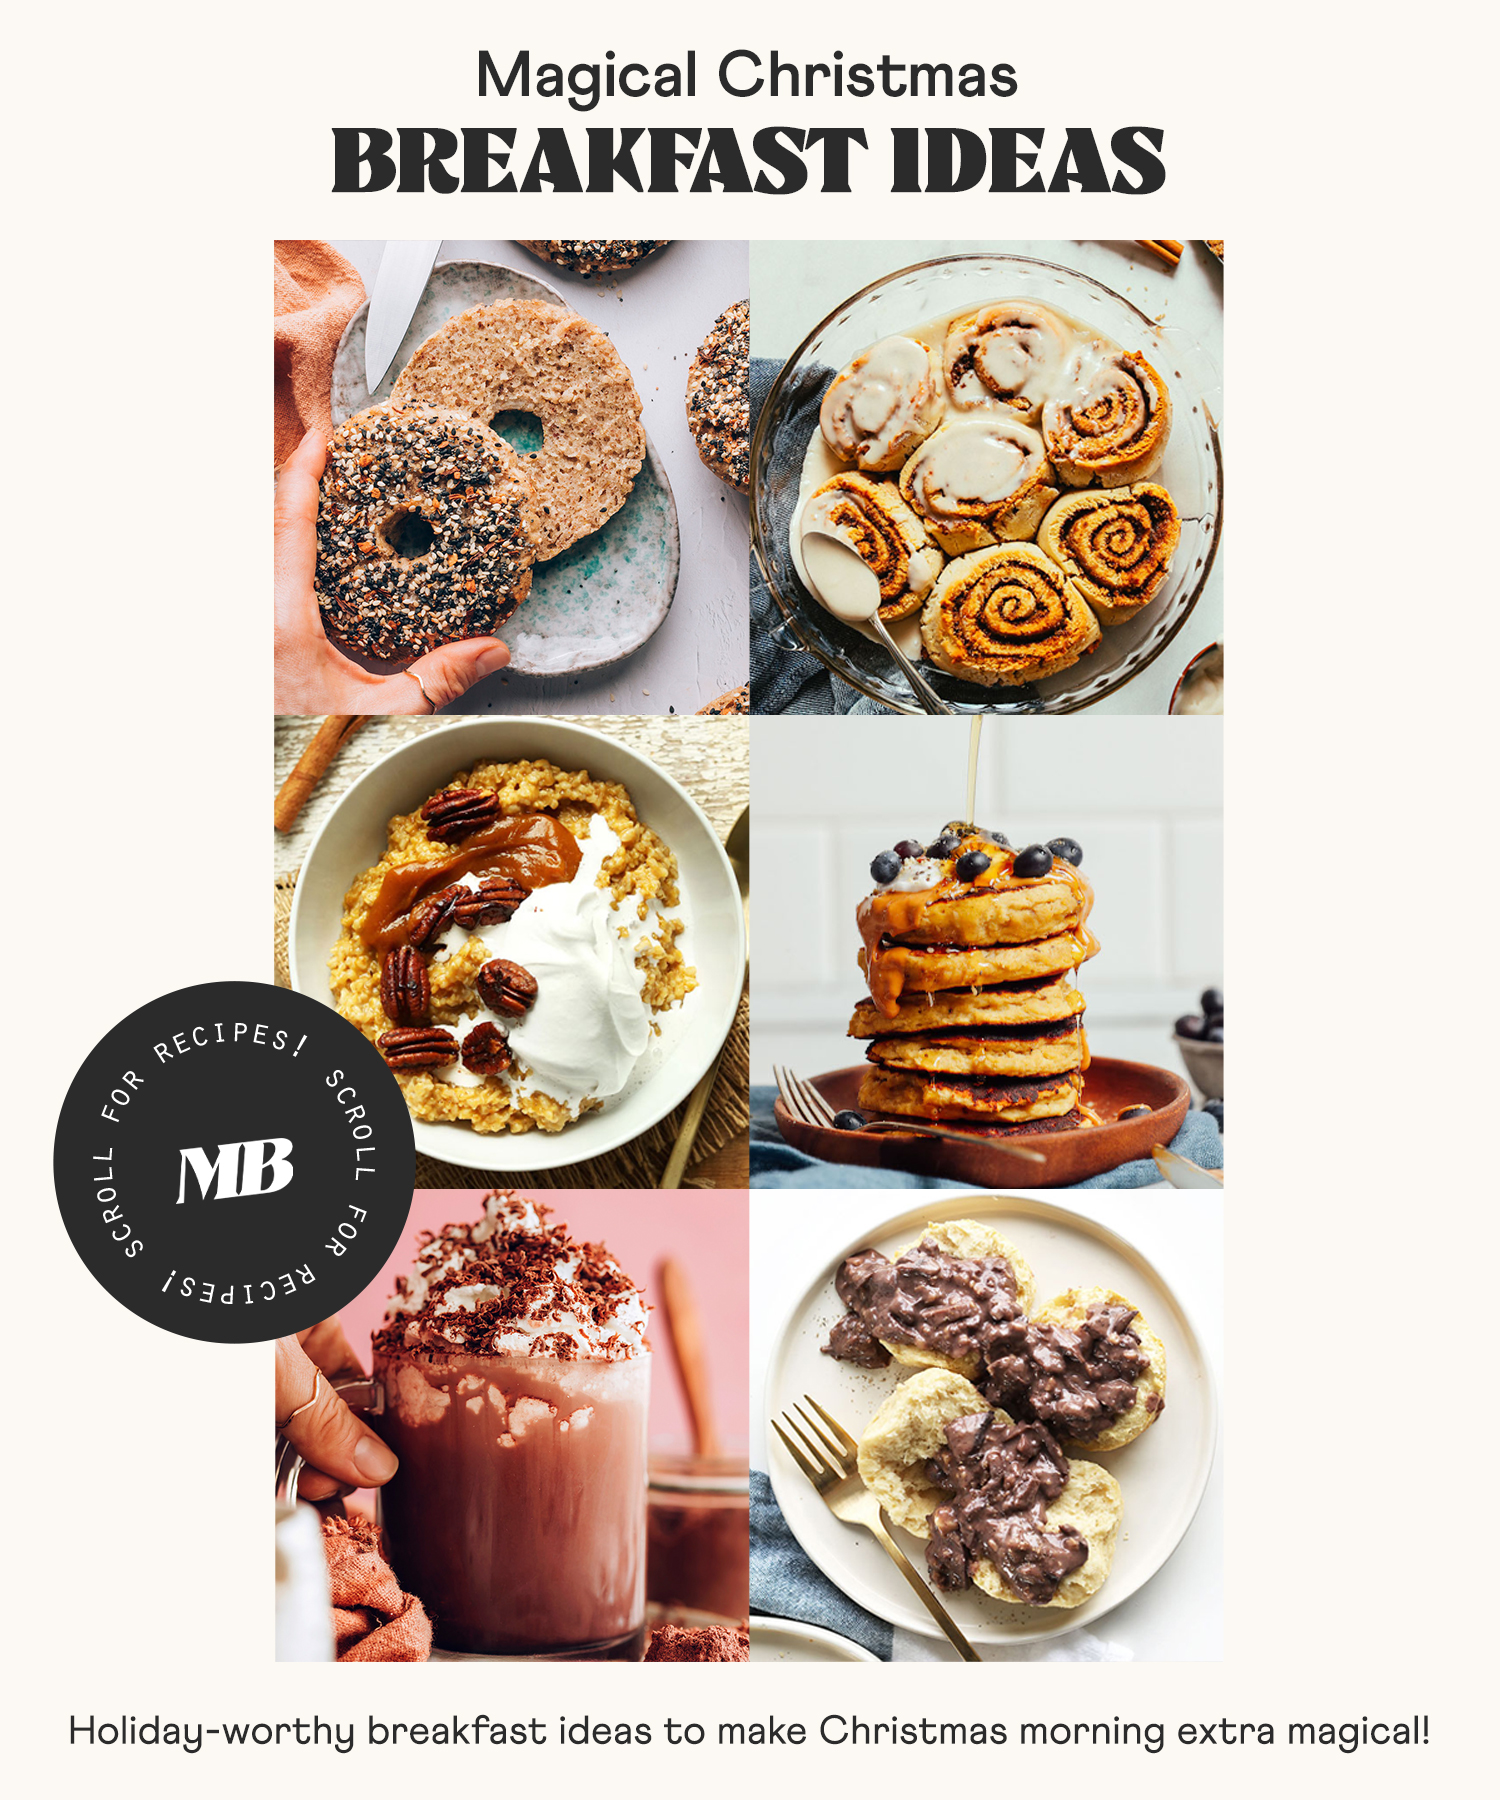 Image of magical Christmas breakfast ideas